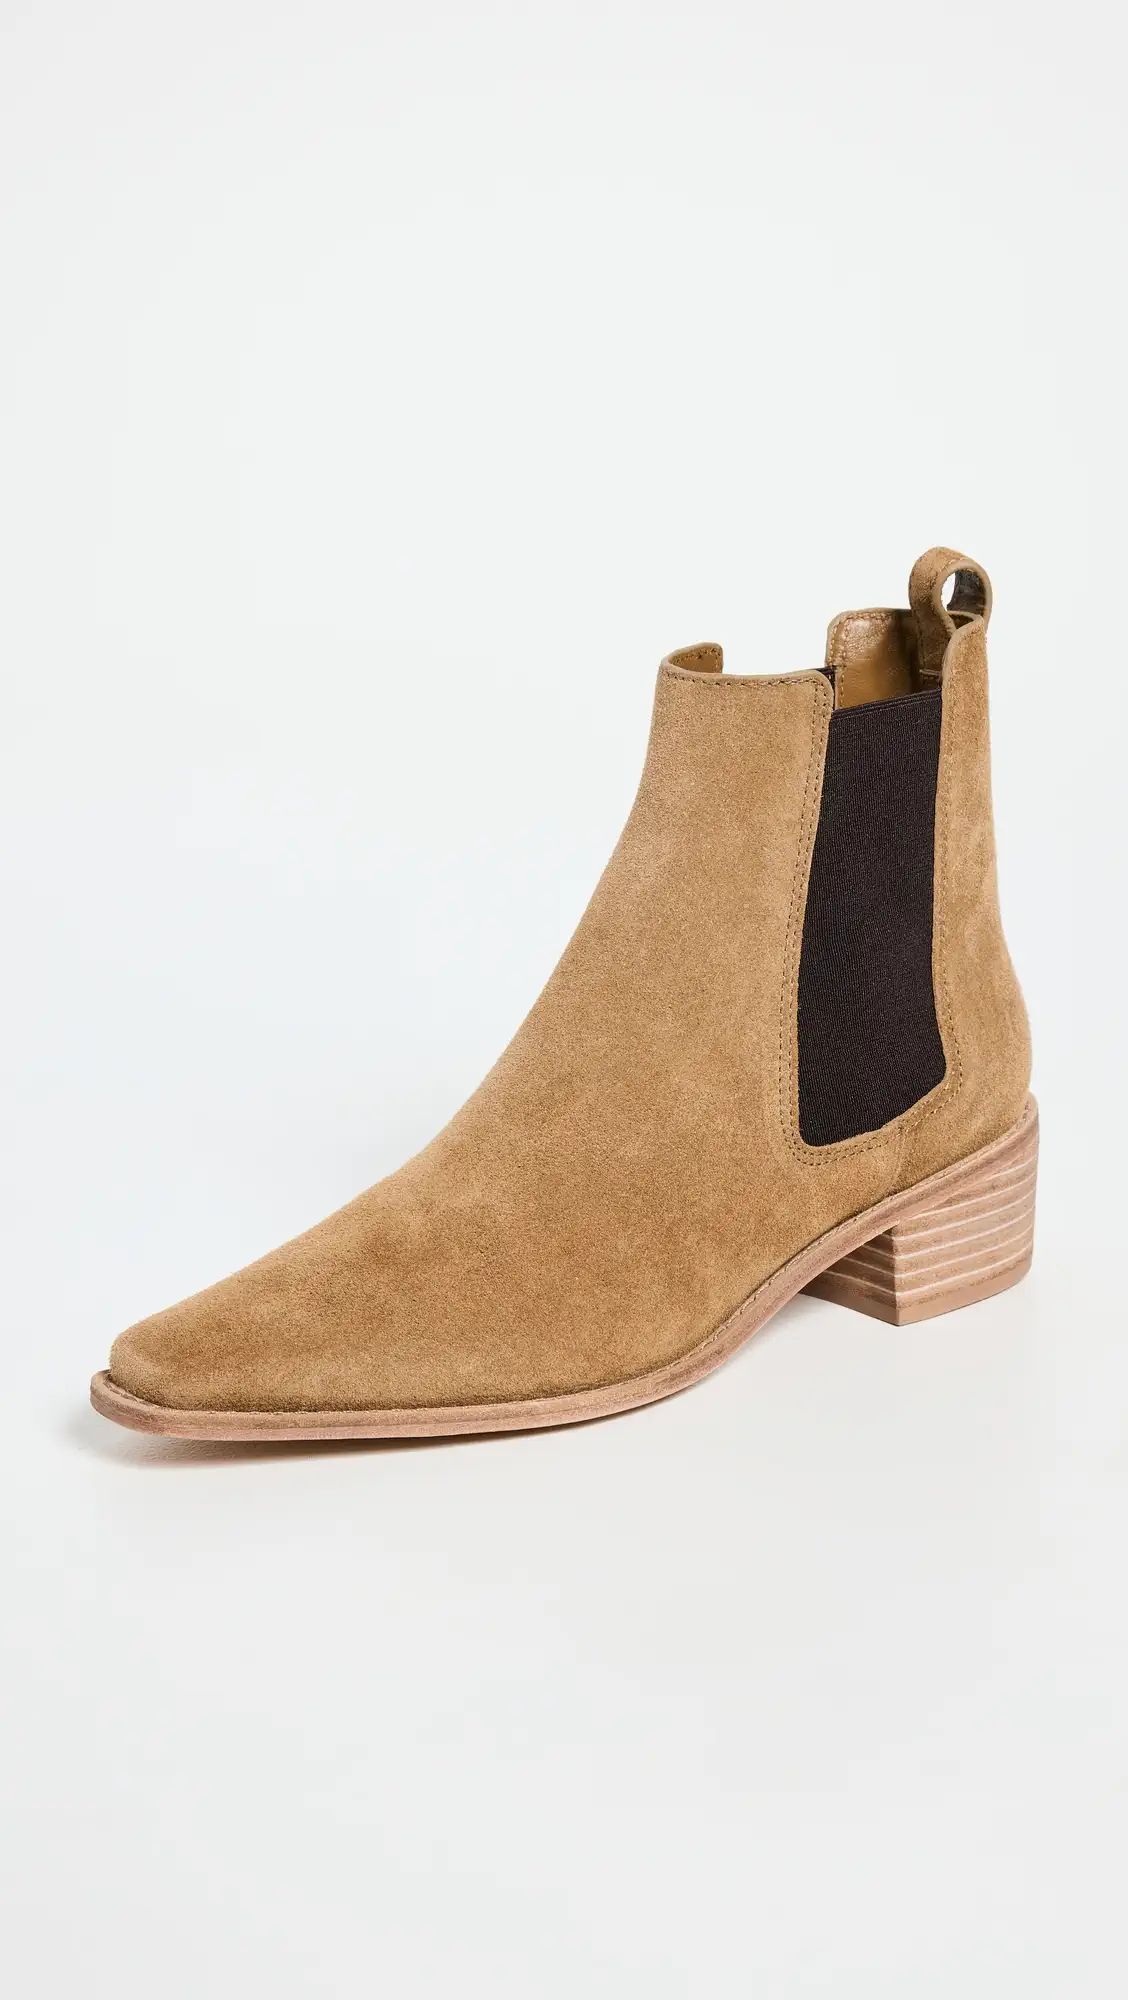 Tory Burch Casual Chelsea Boots 45mm | Shopbop | Shopbop